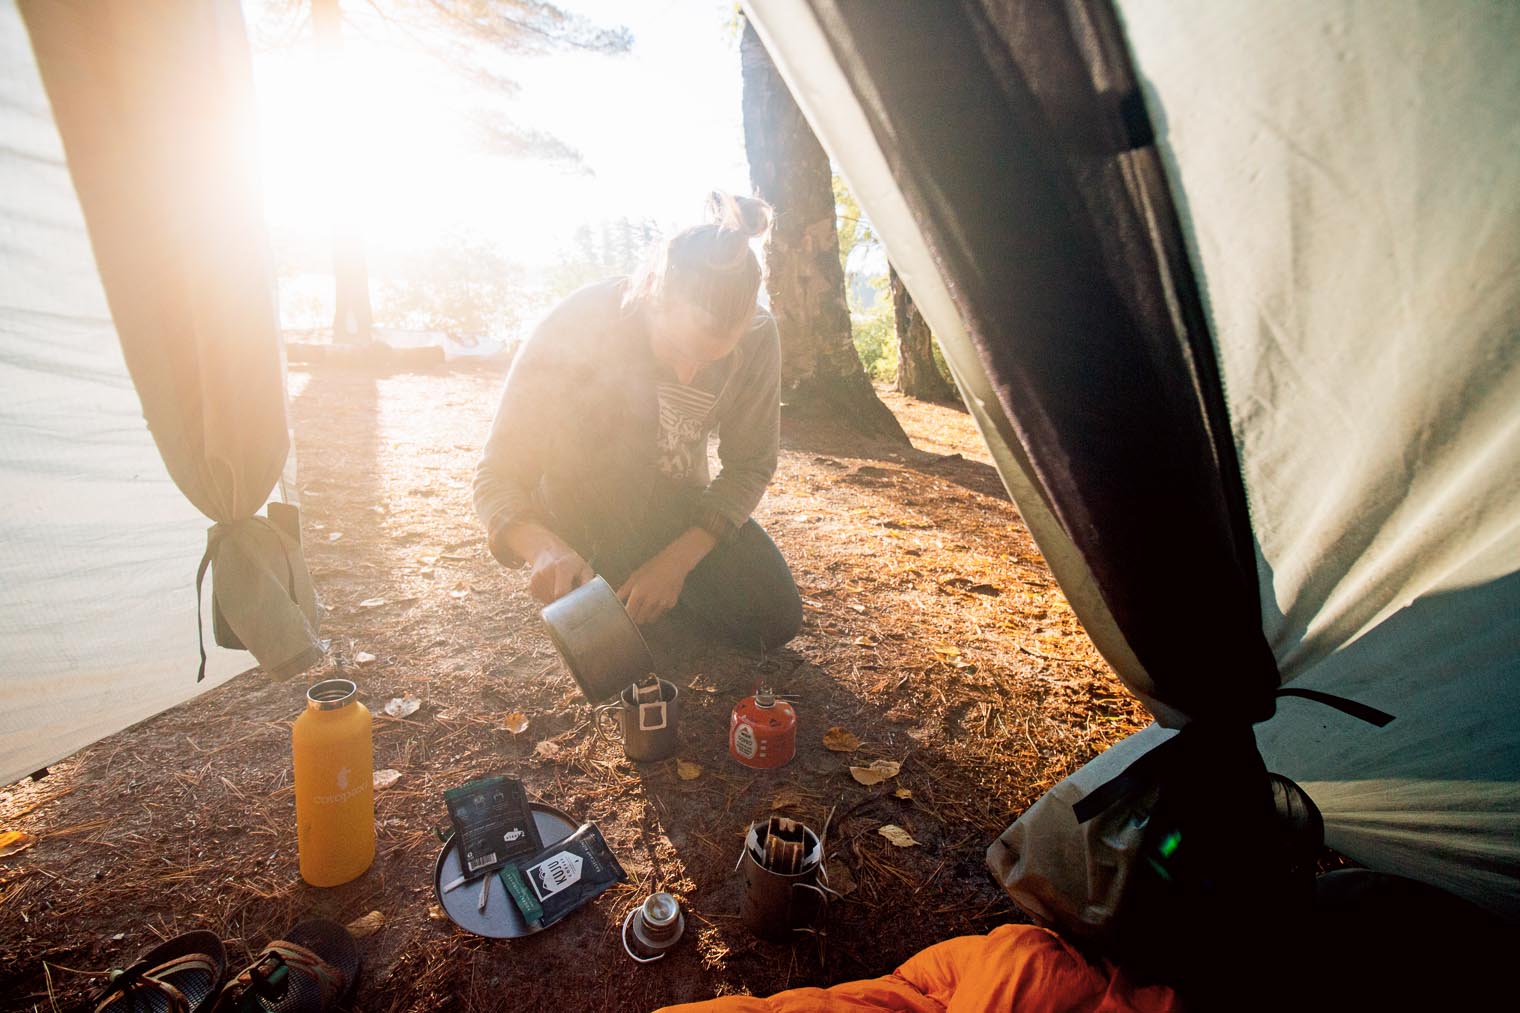 Michael making coffee in front of a backpacking tent